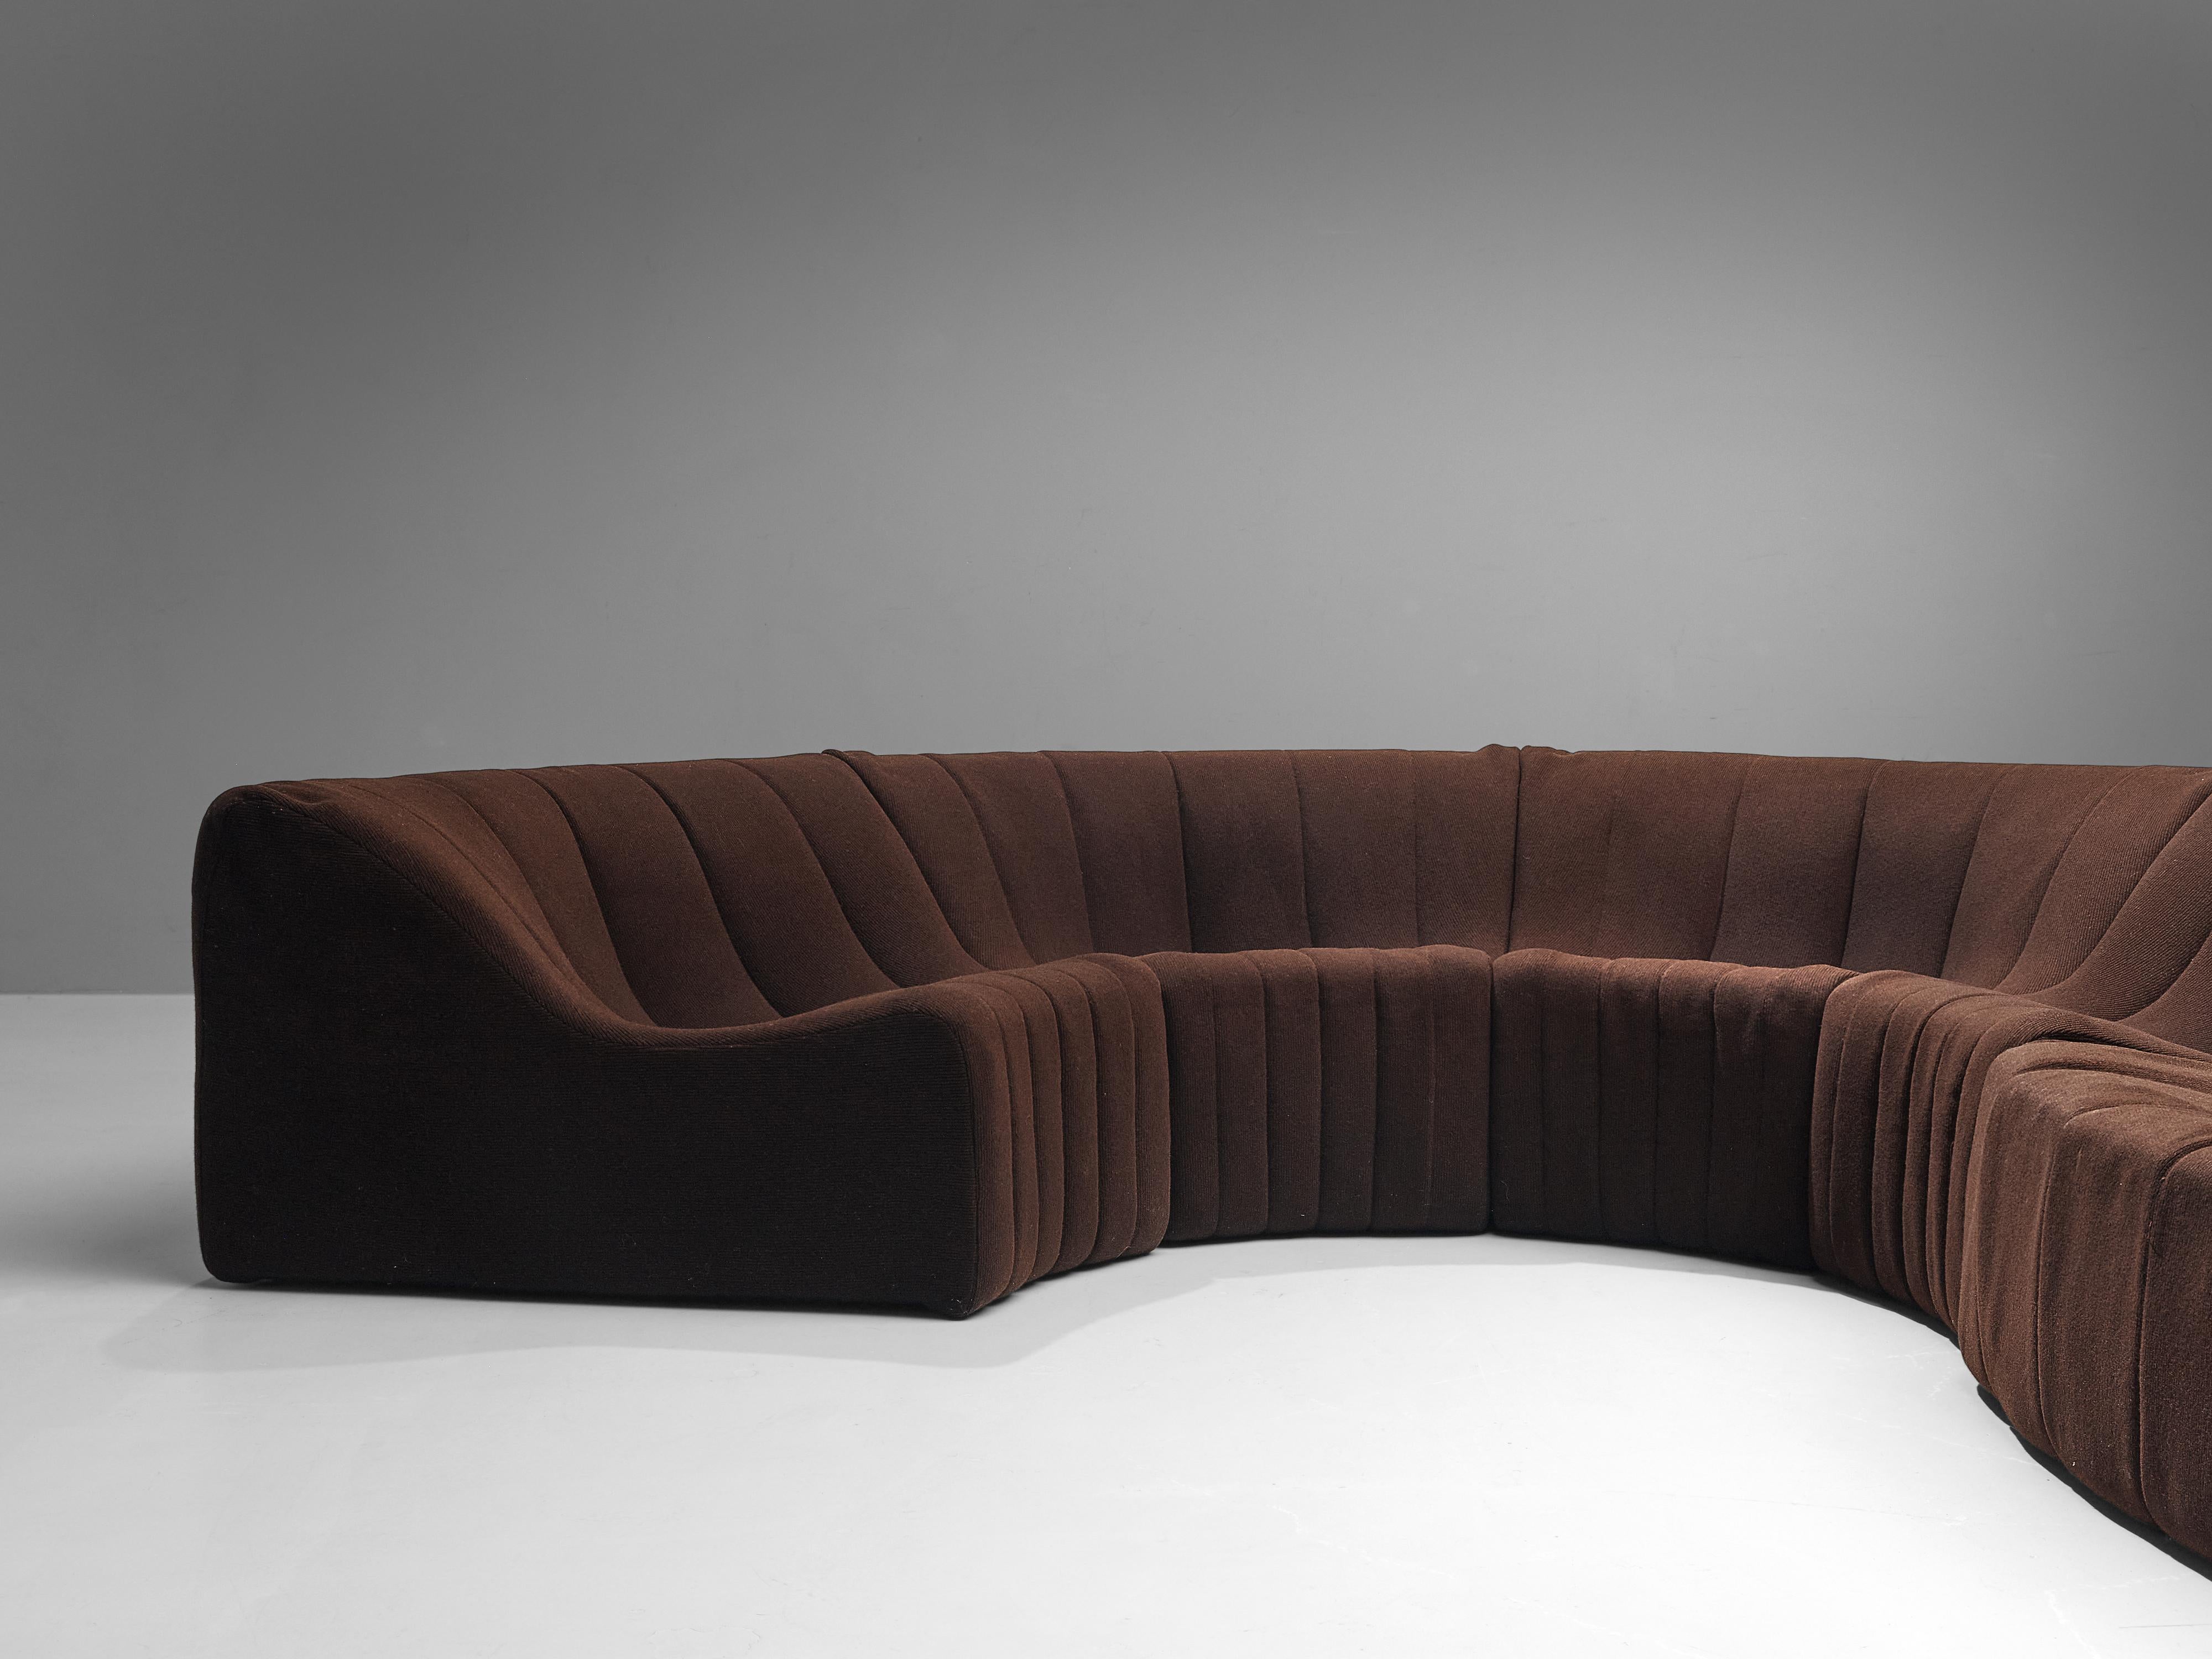 Kwok Hoi Chan for Steiner´Chromatic´ Modular Sofa in Brown Upholstery 4